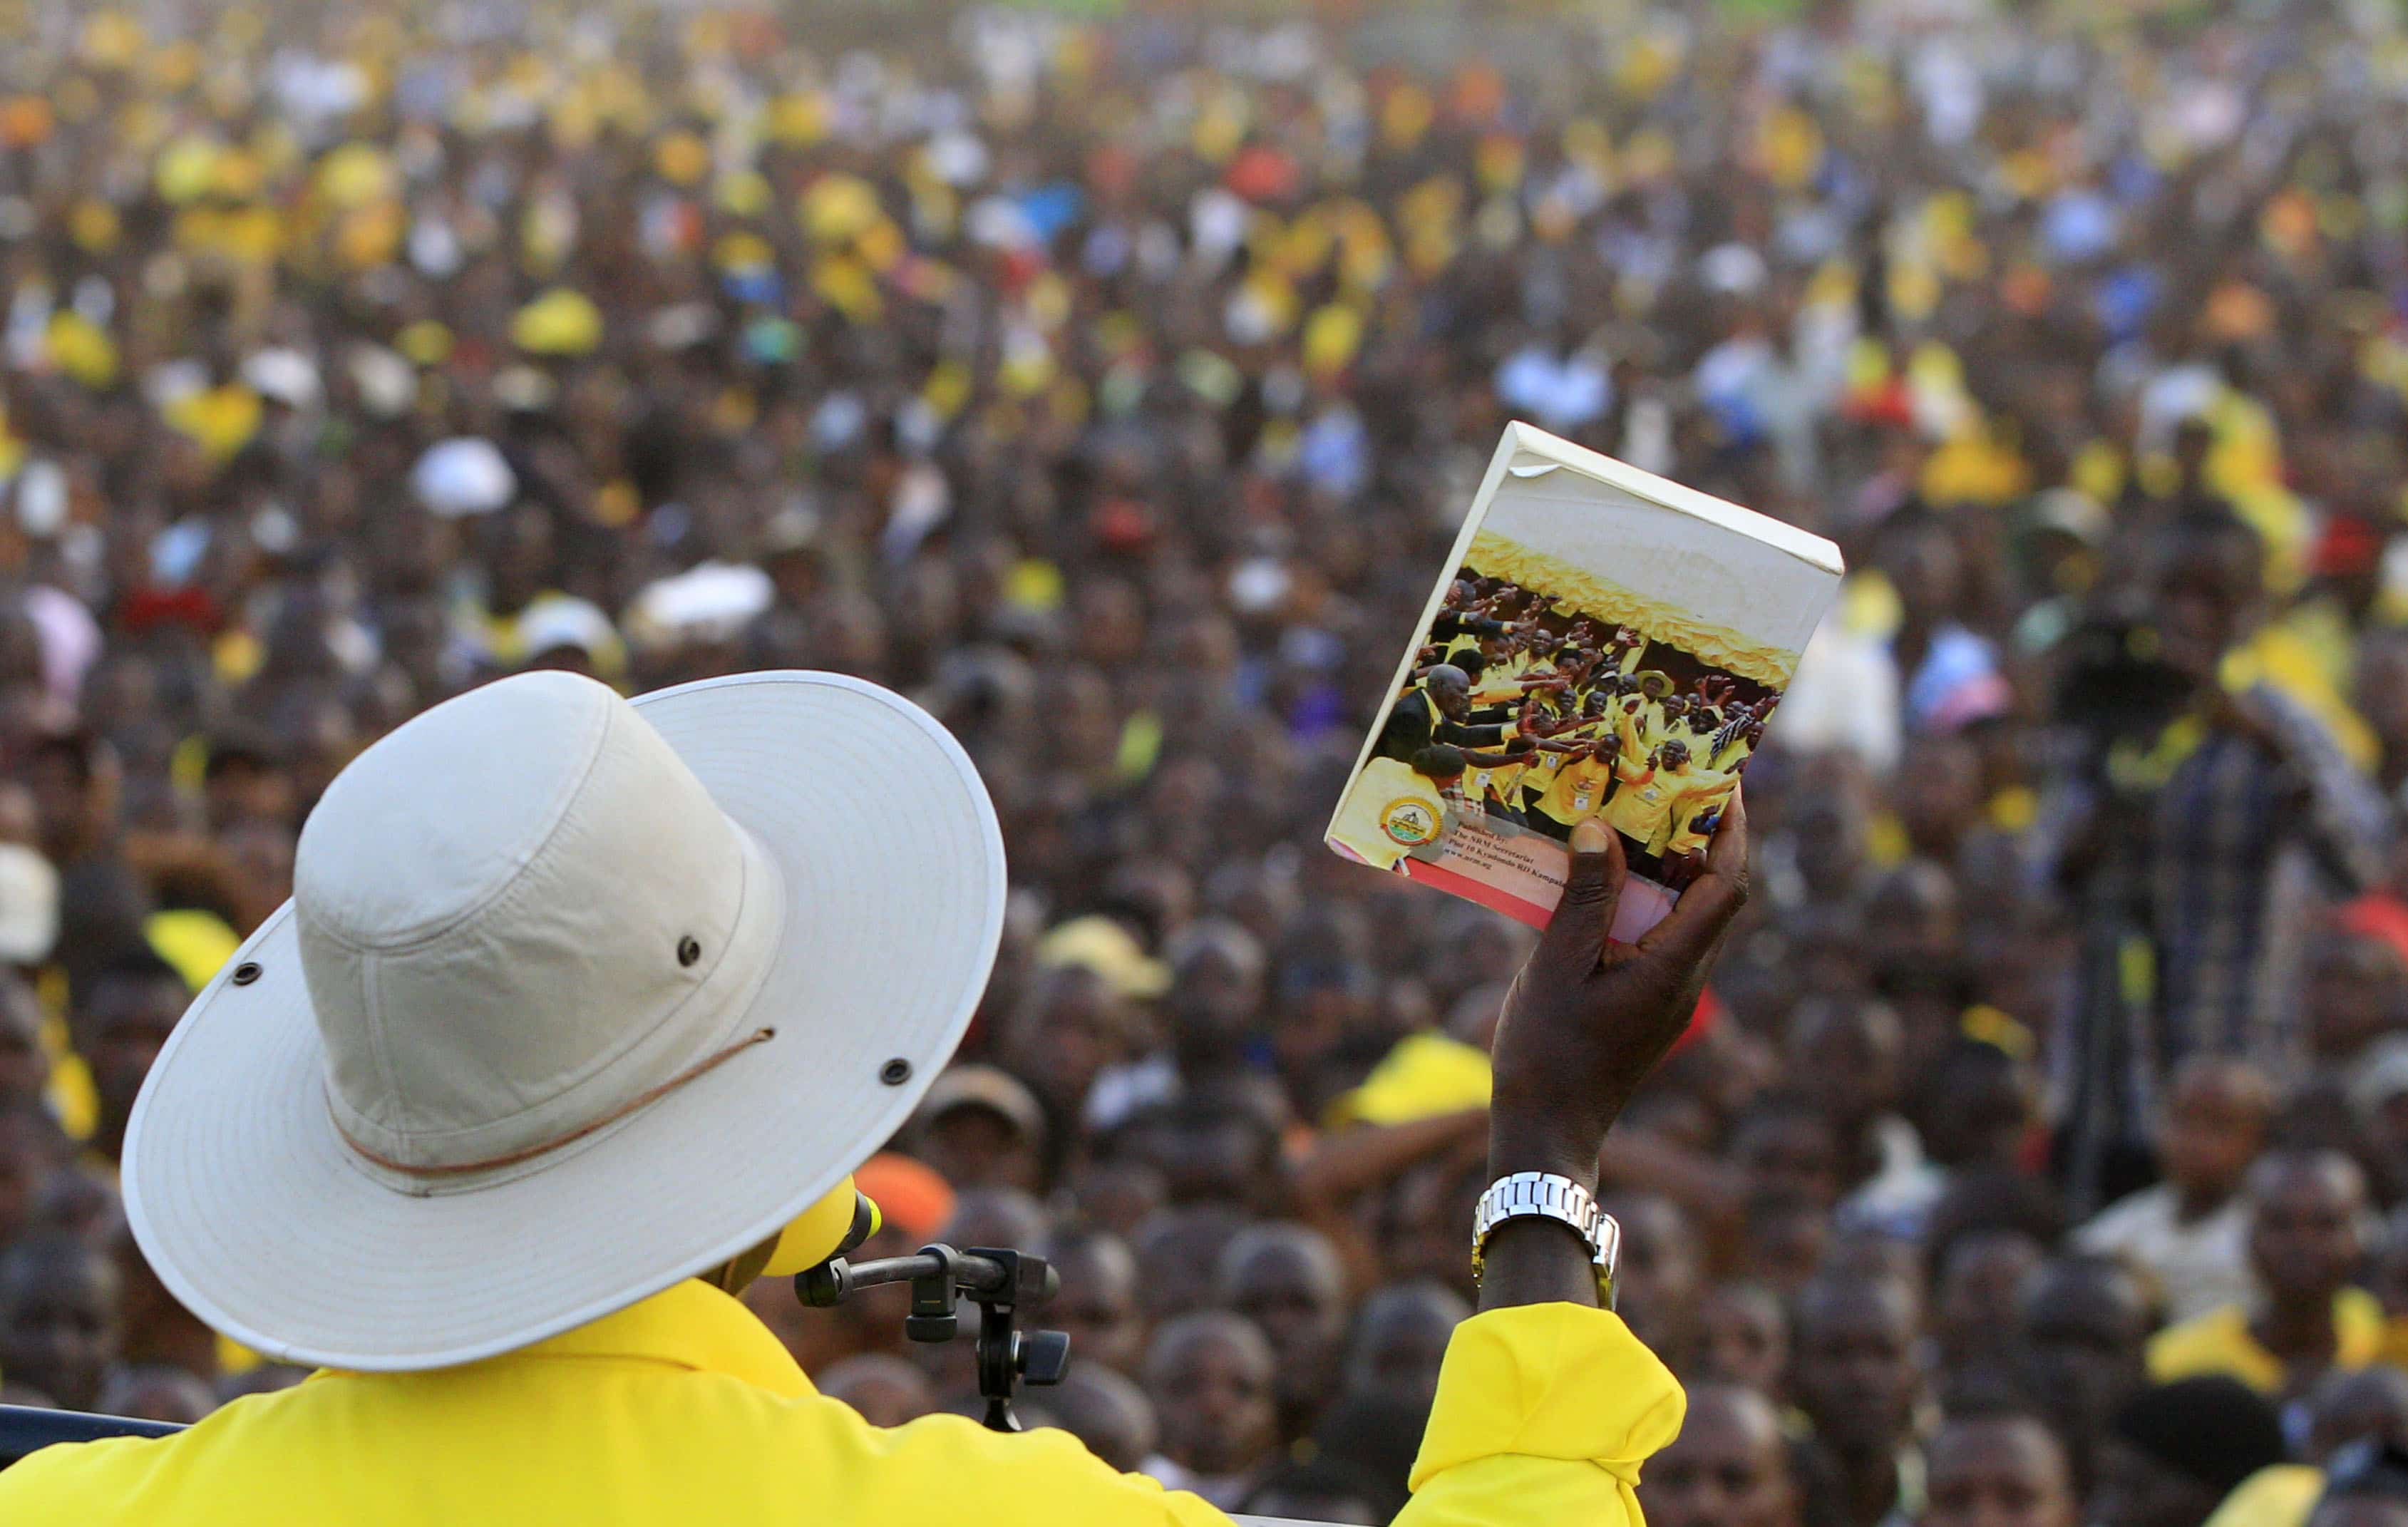 Ugandan president Yoweri Museveni shows his manifesto to supporters during a campaign rally in Entebbe, Uganda, 10 February 2016,  REUTERS/James Akena